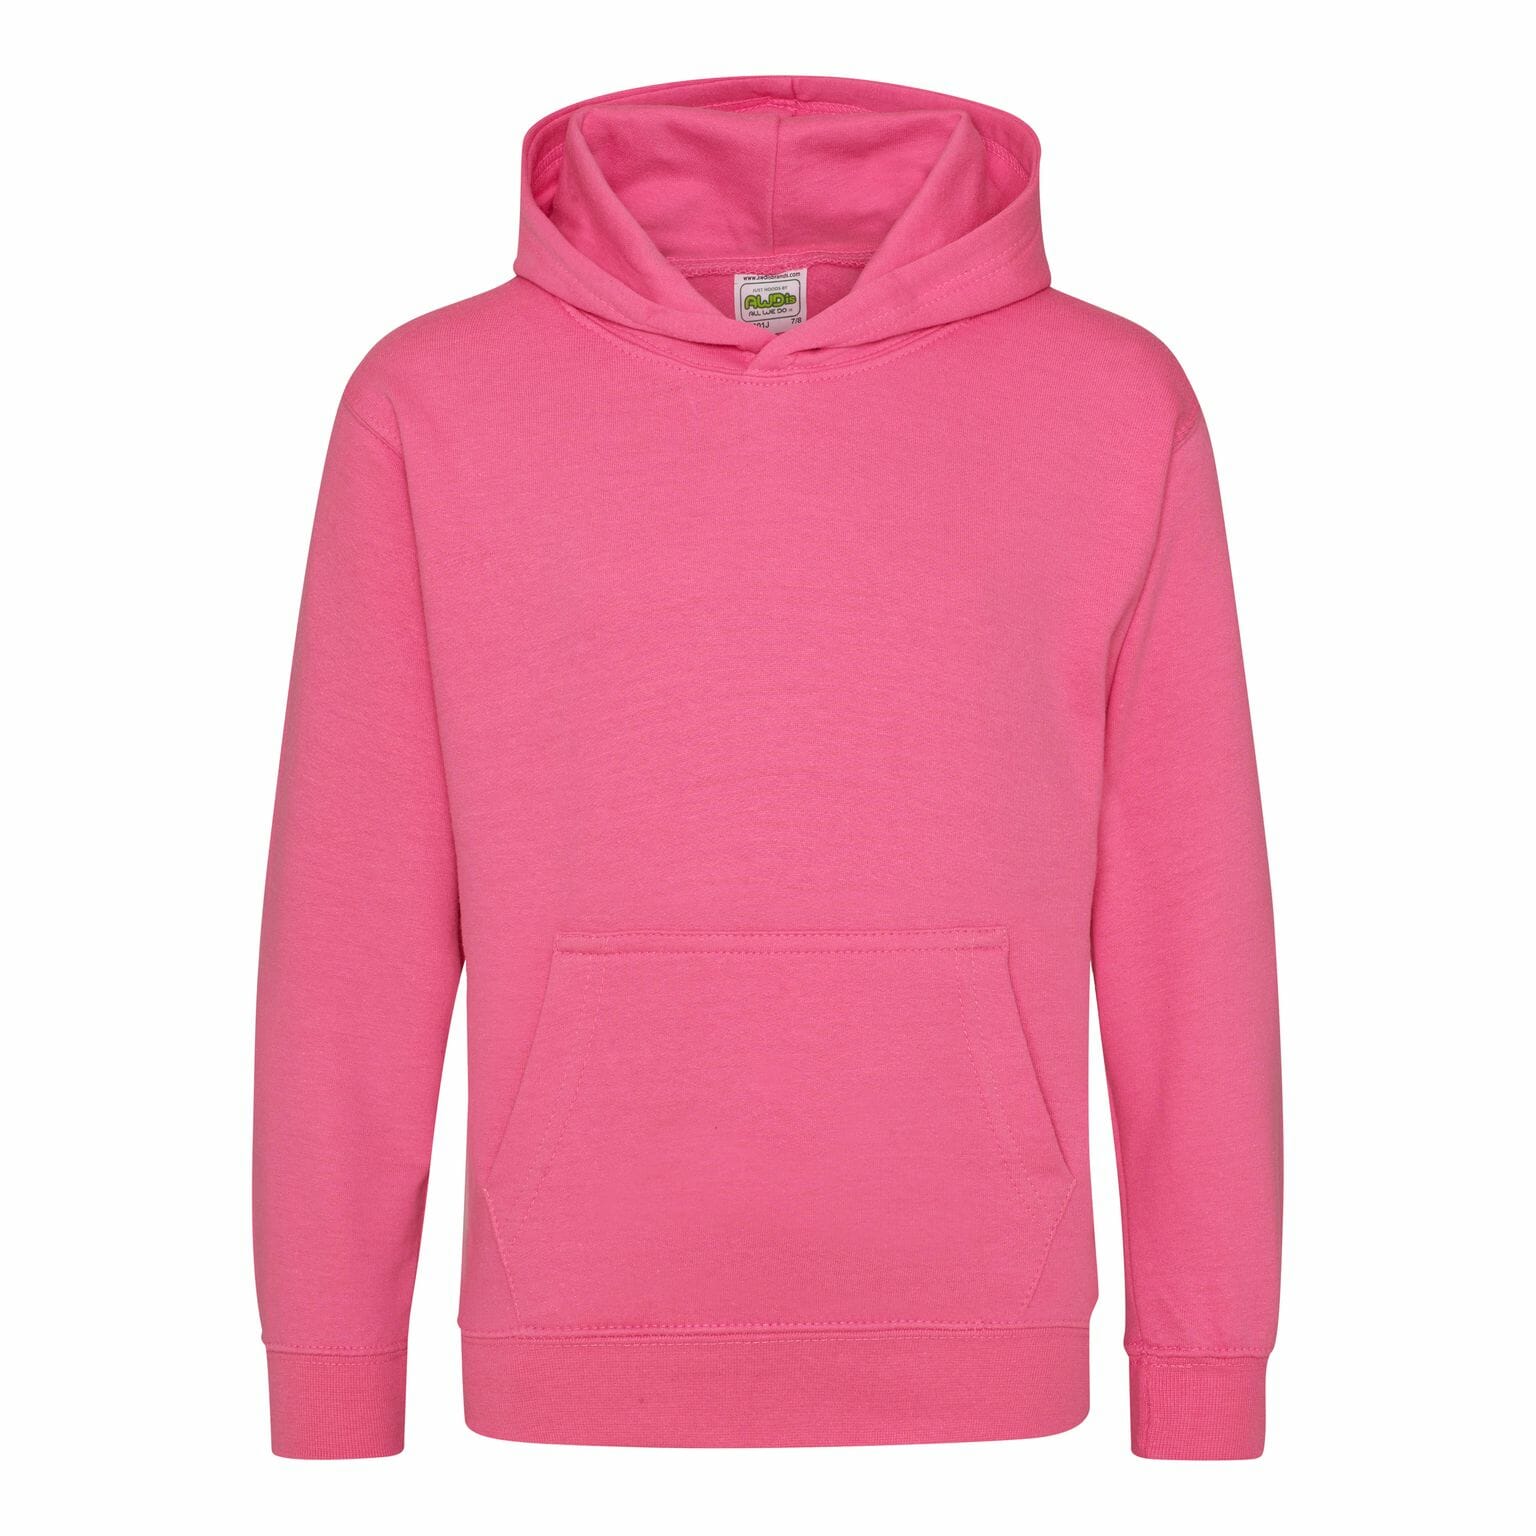 AWD_JustHoods_Kids_Hoodie_JH01J_CandyFlossPink